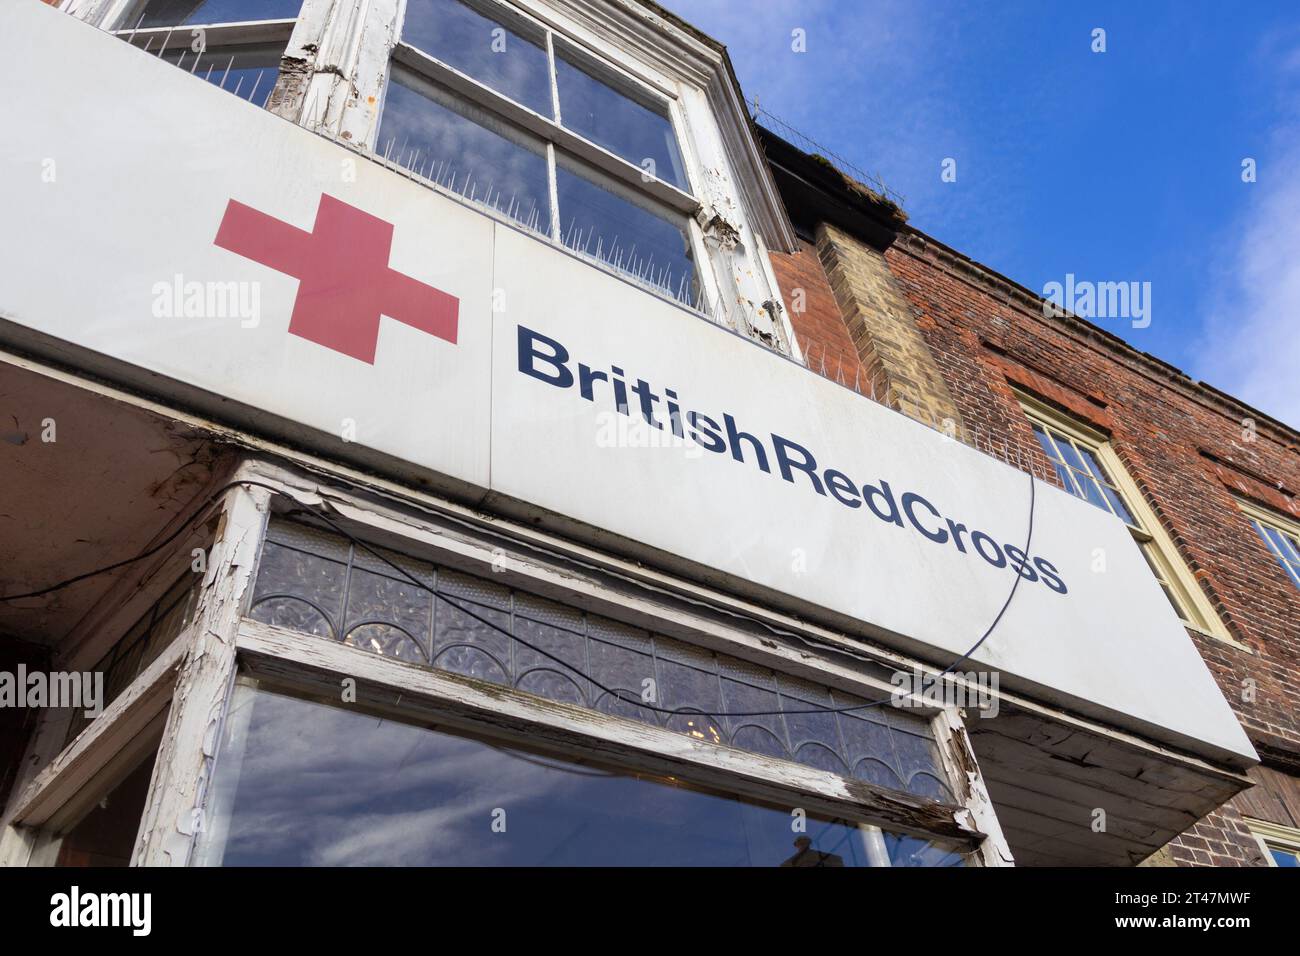 British red cross sign and frontage, new romney high street, kent, uk Stock Photo